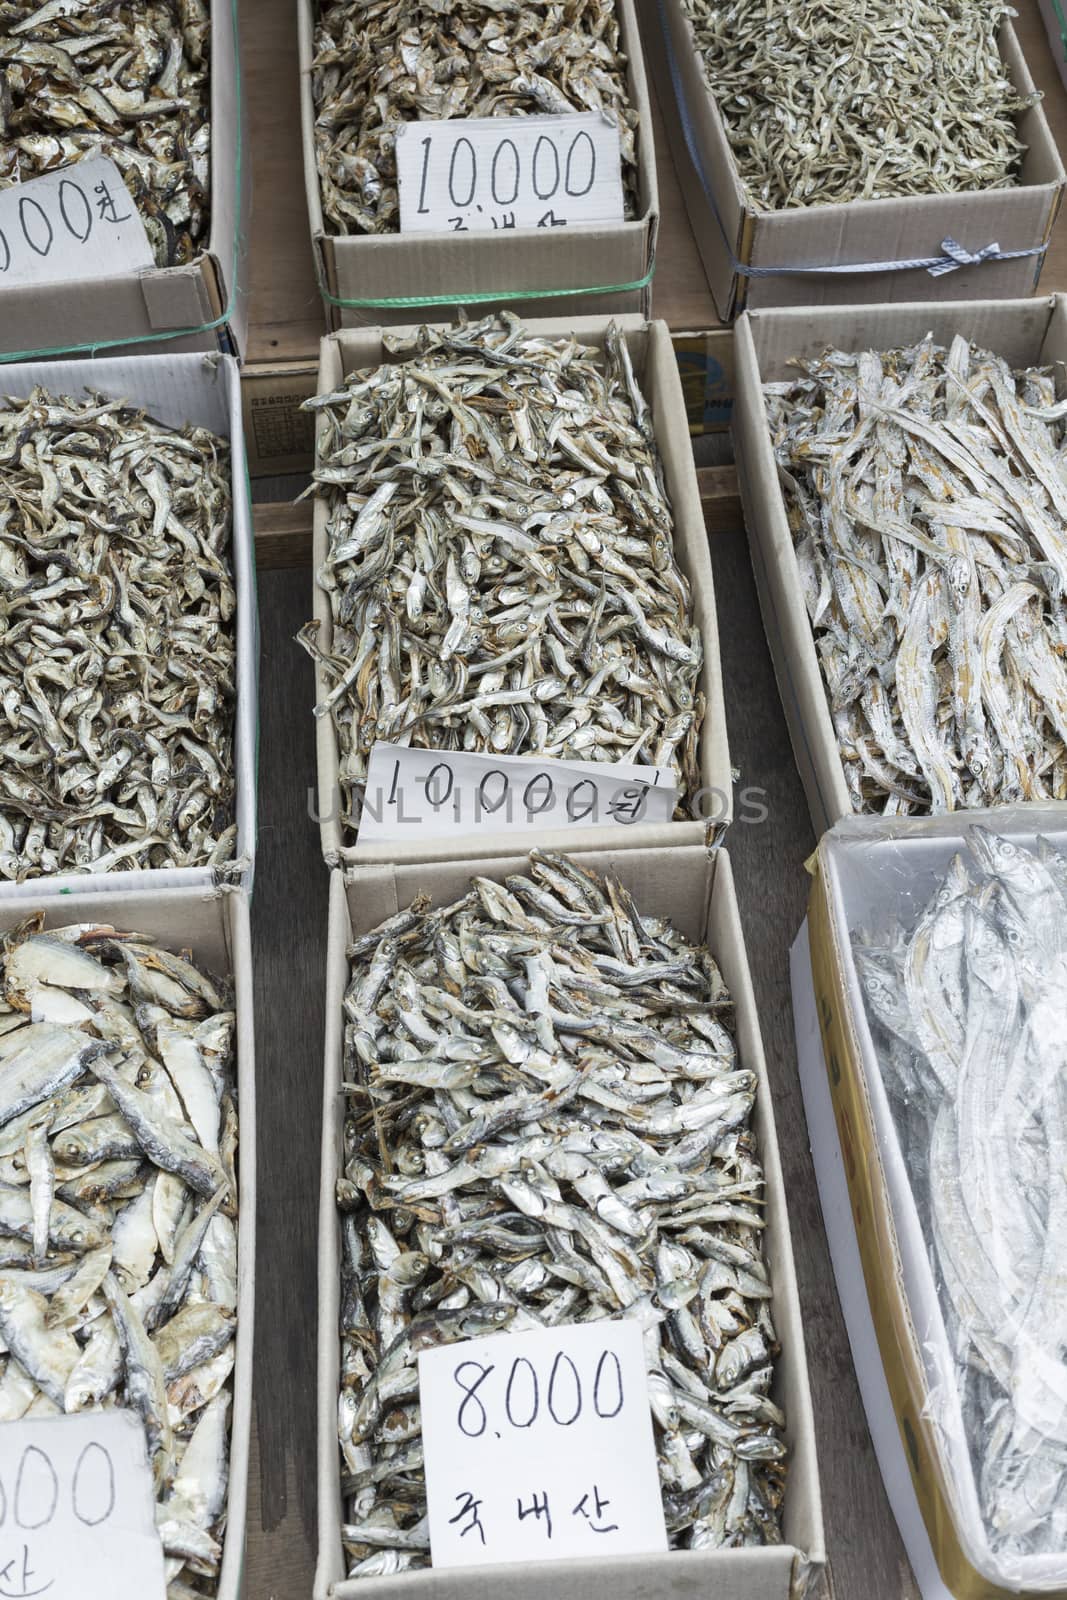 Dried fish market in South Korea